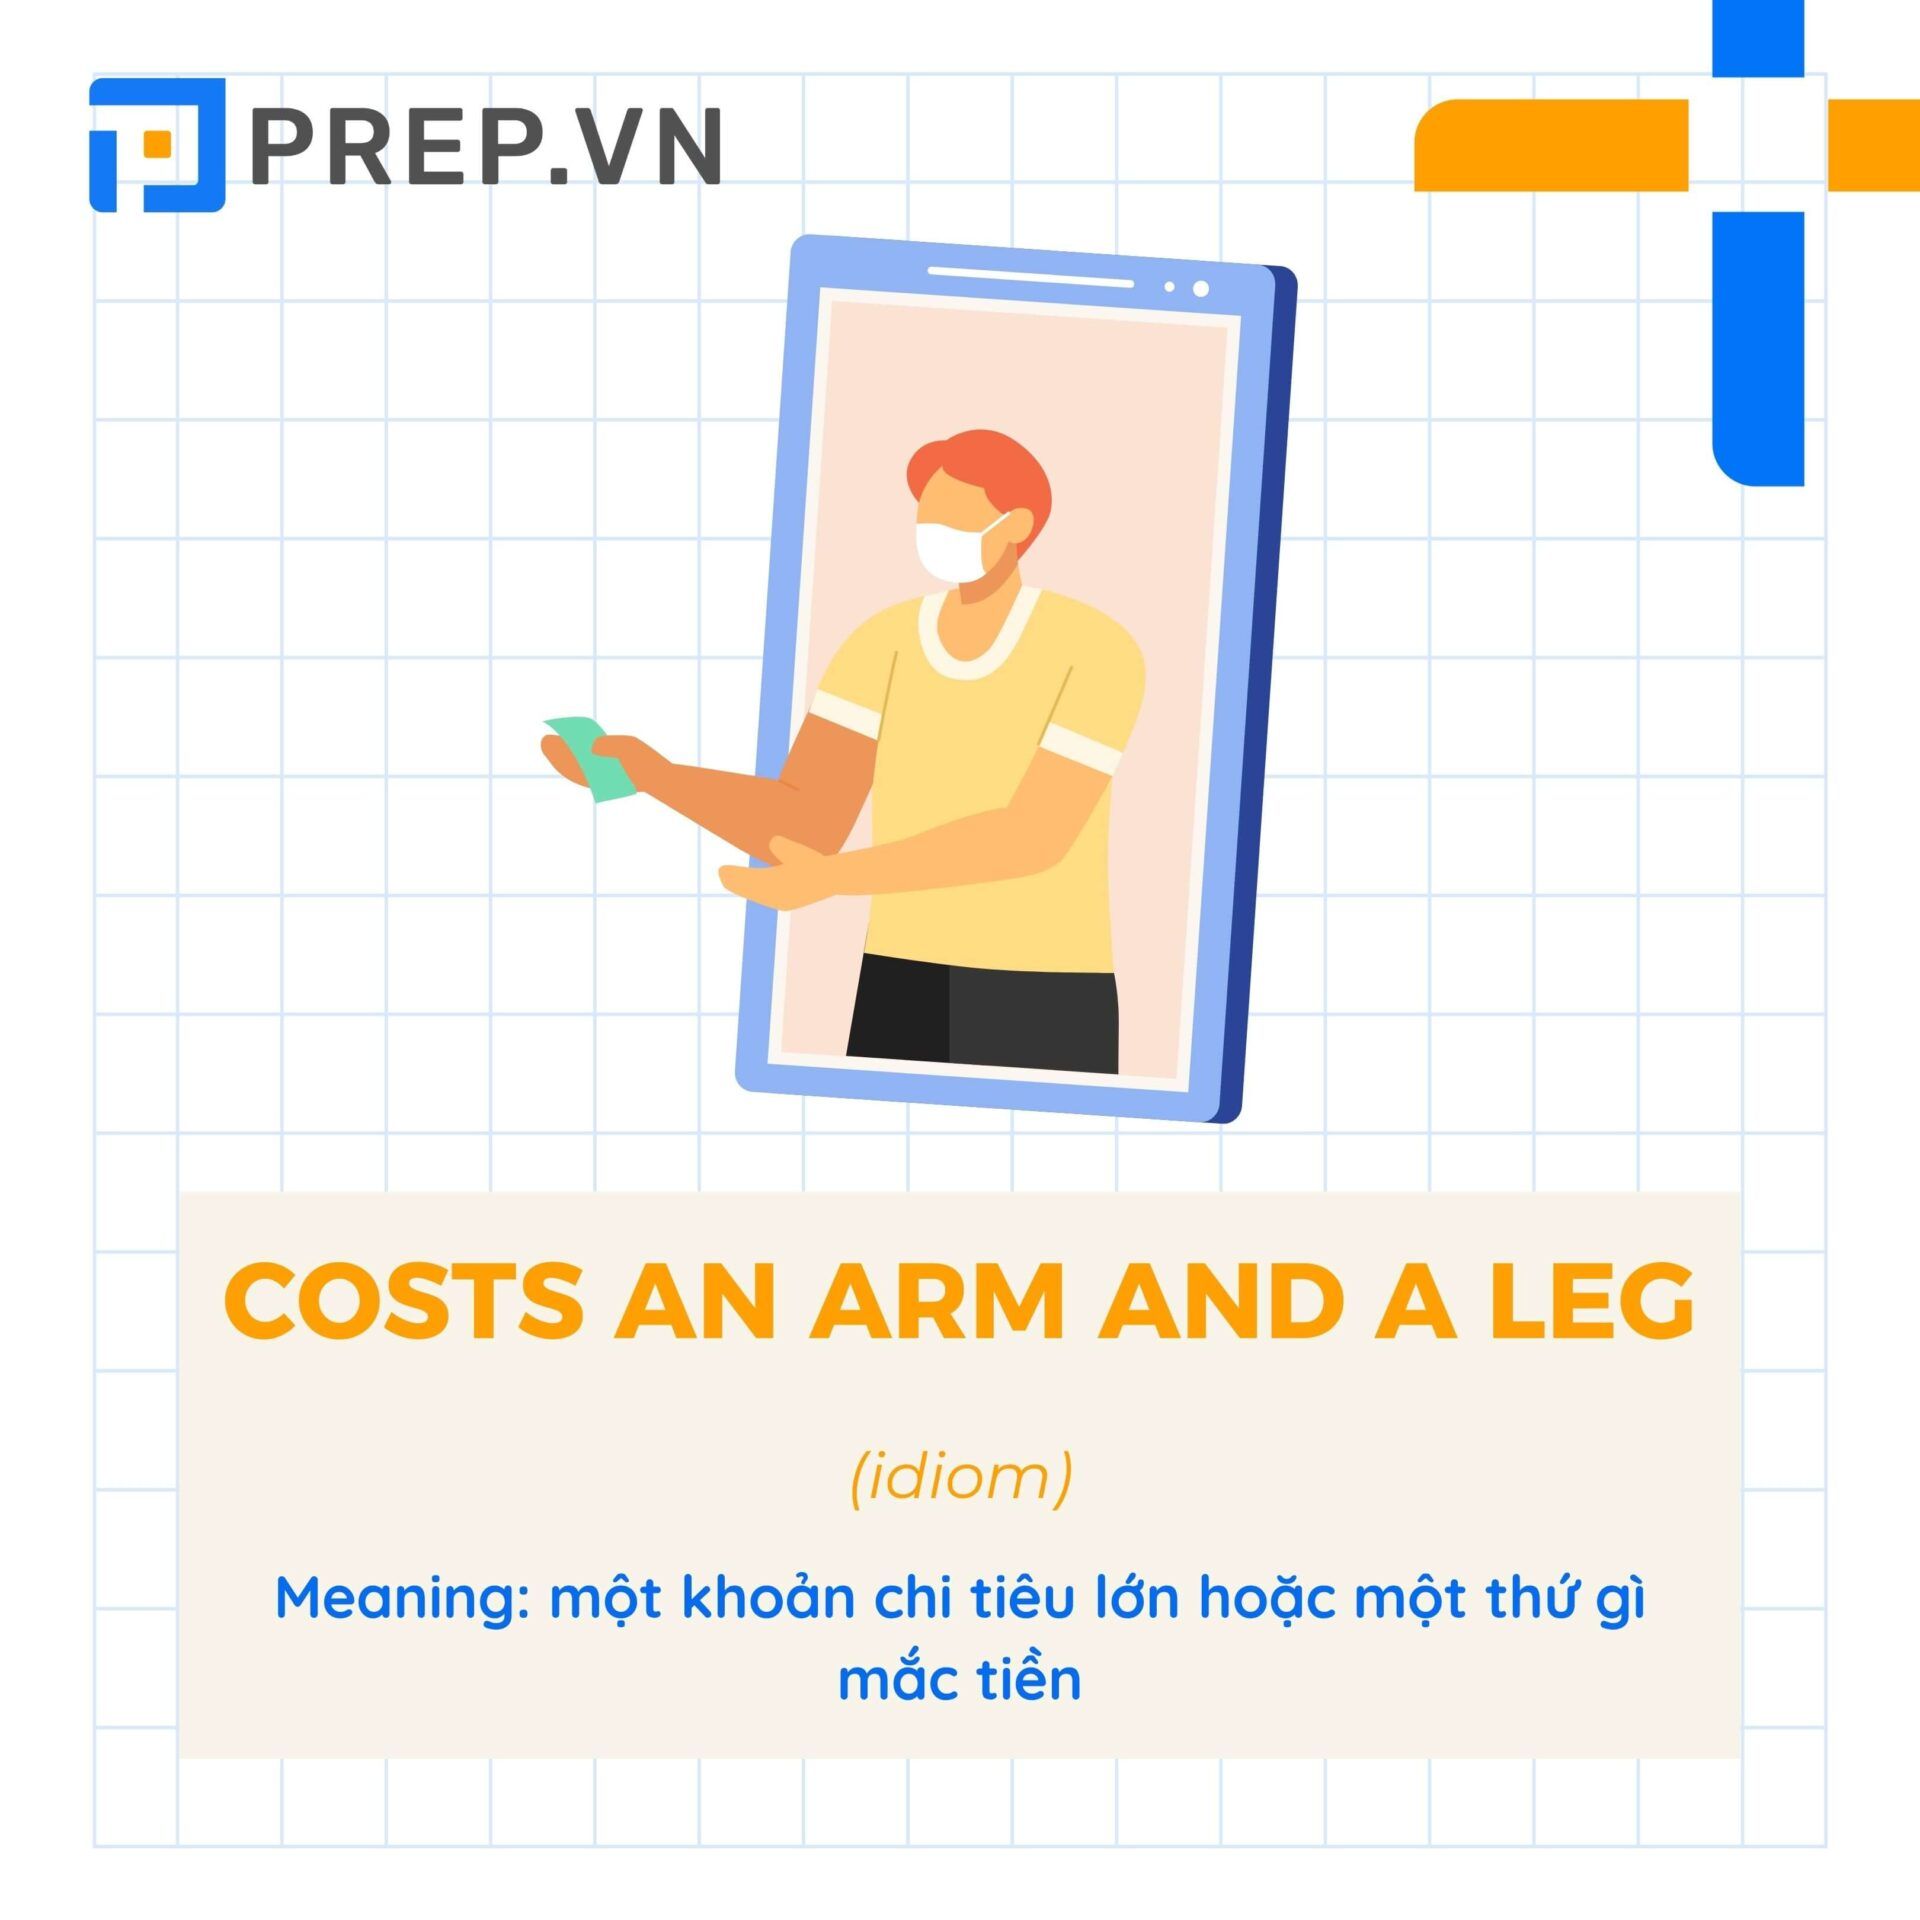 Costs an arm and a leg